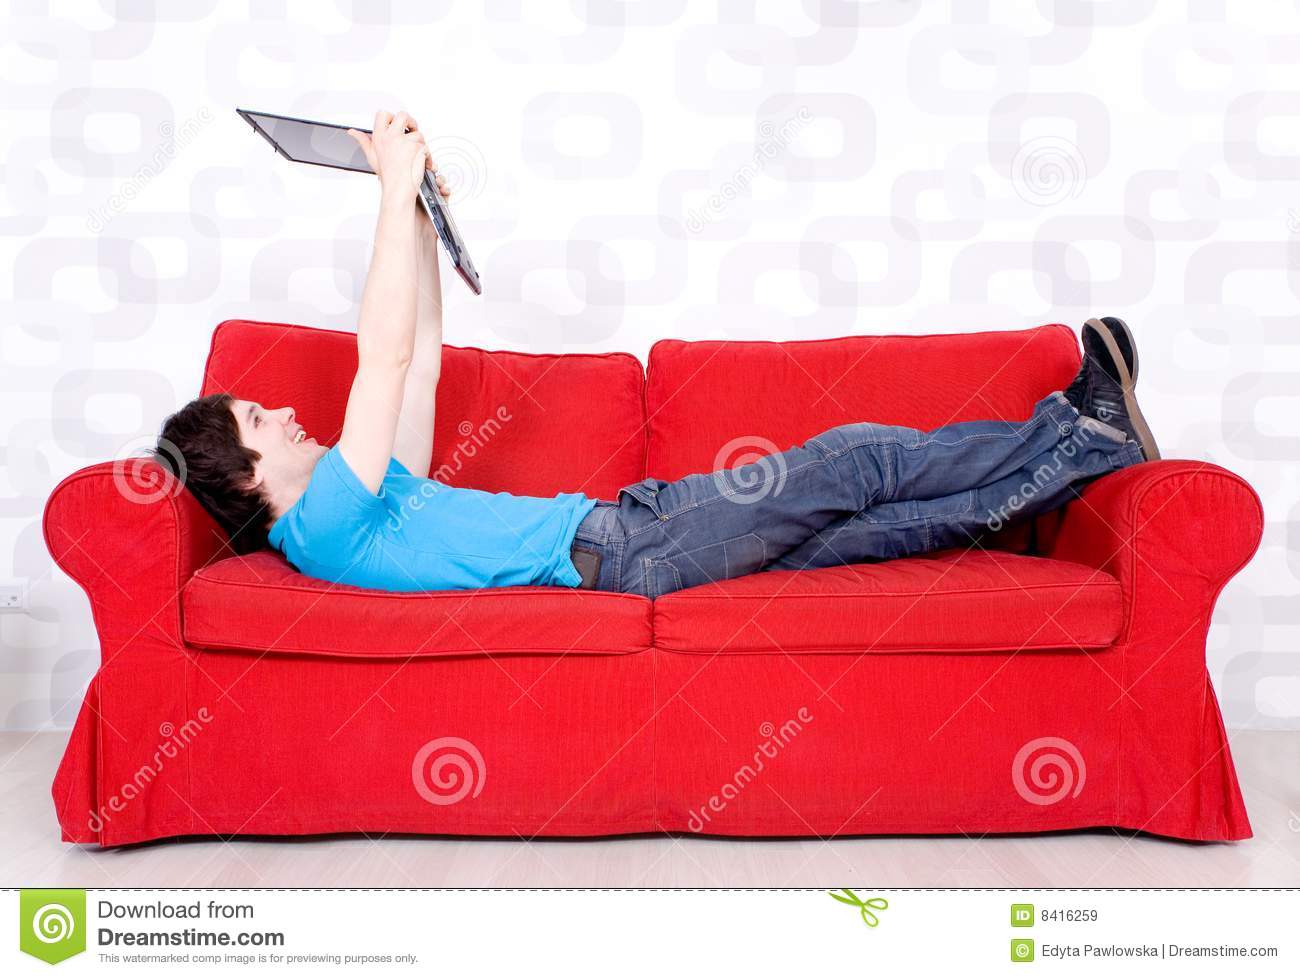 Man Lying On Couch With Laptop Royalty Free Stock Images   Image